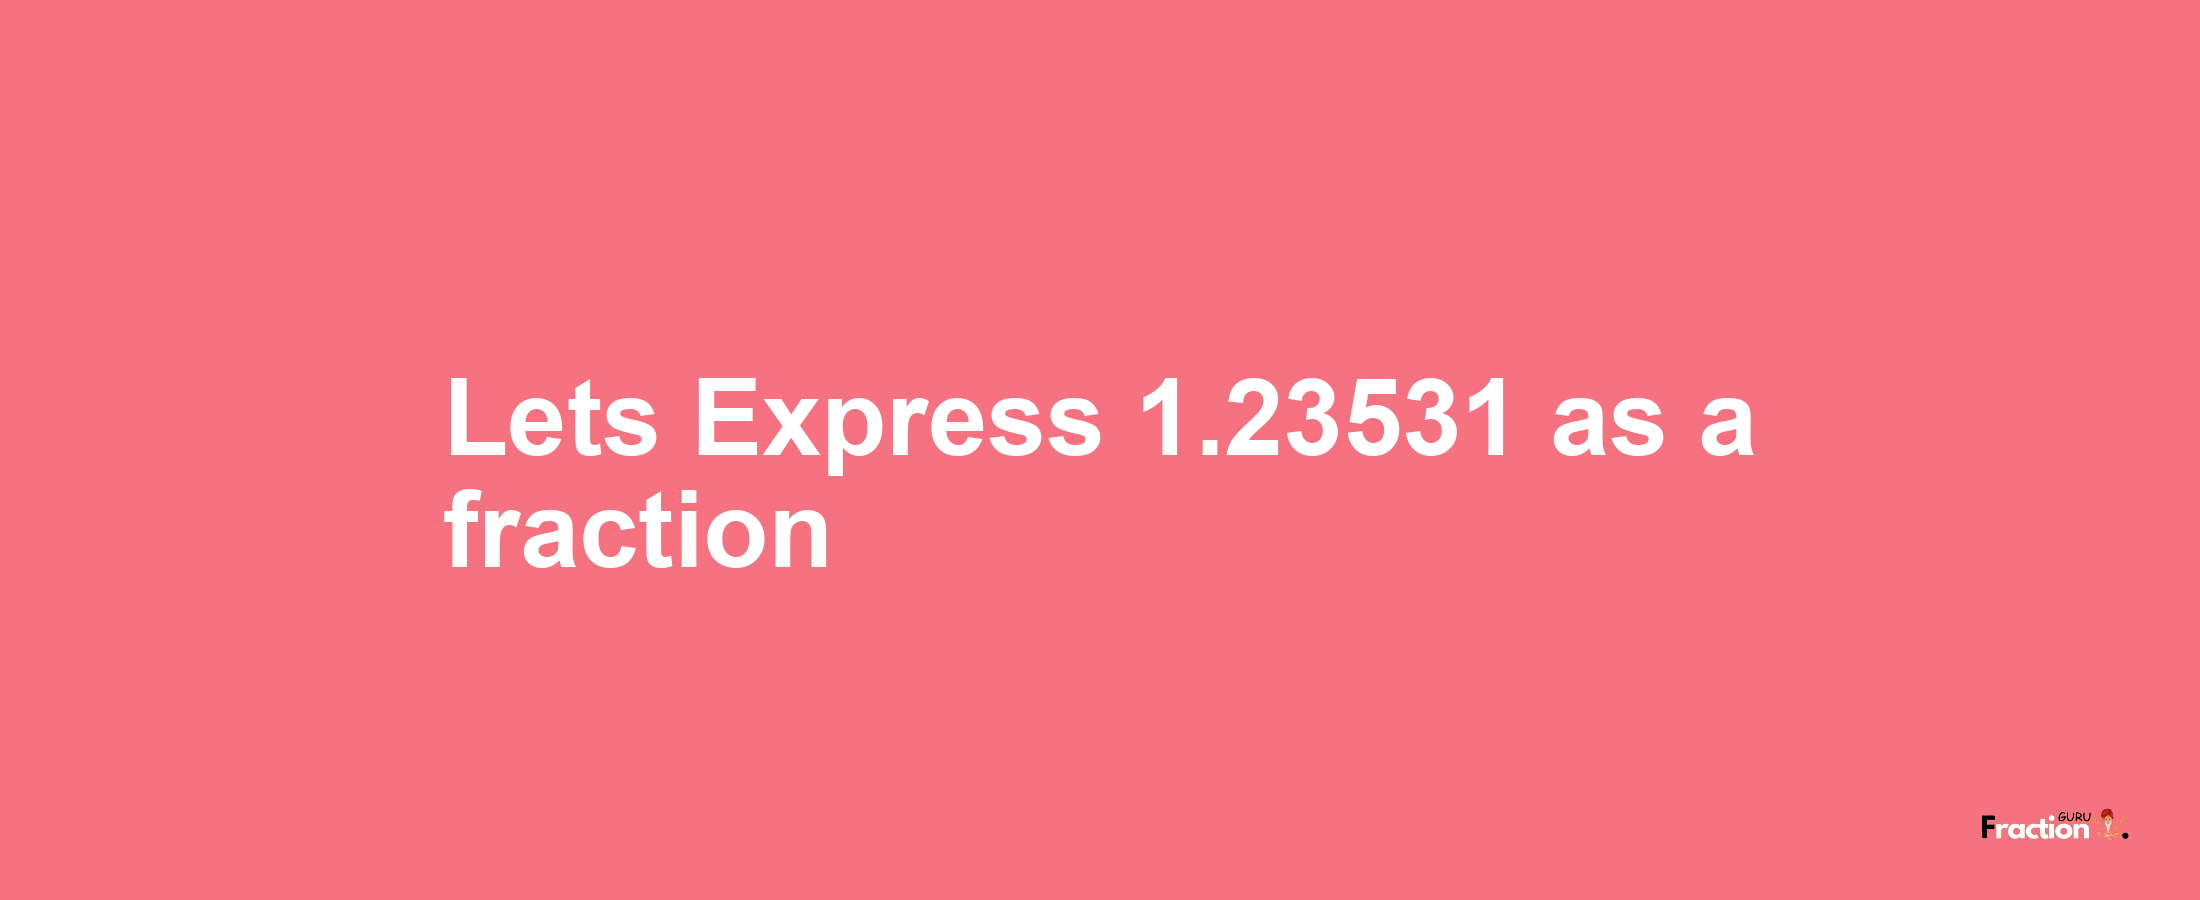 Lets Express 1.23531 as afraction